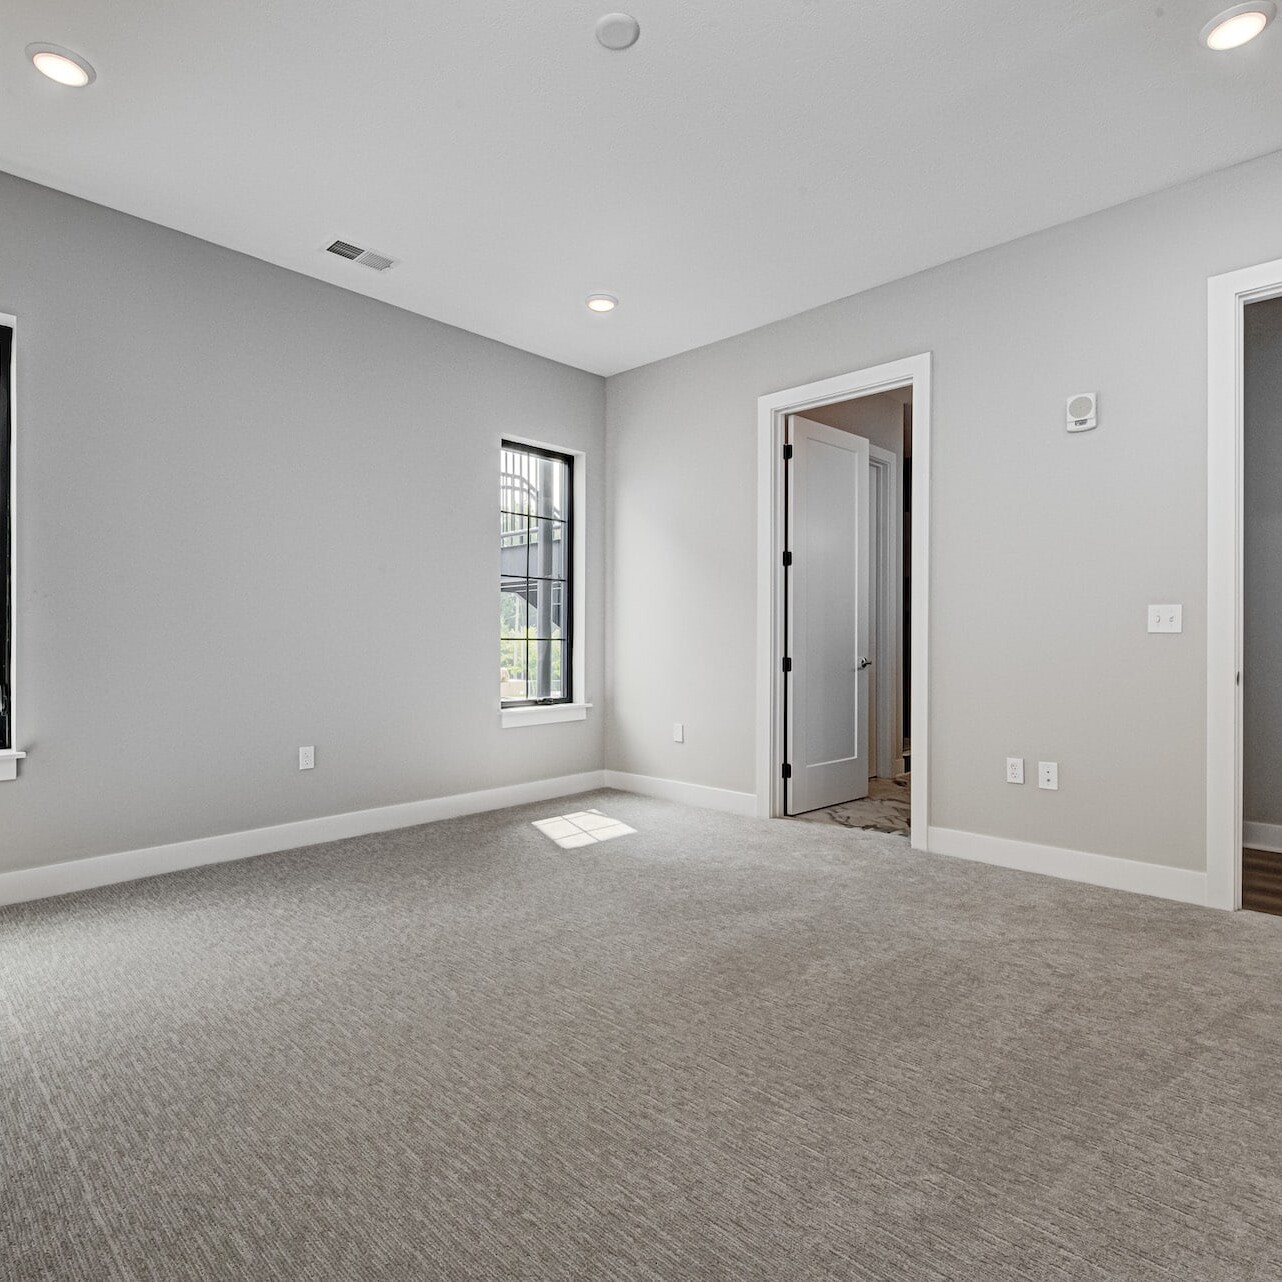 Empty bedroom with gray carpet and windows, designed by a Custom Home Builder in Carmel Indiana.